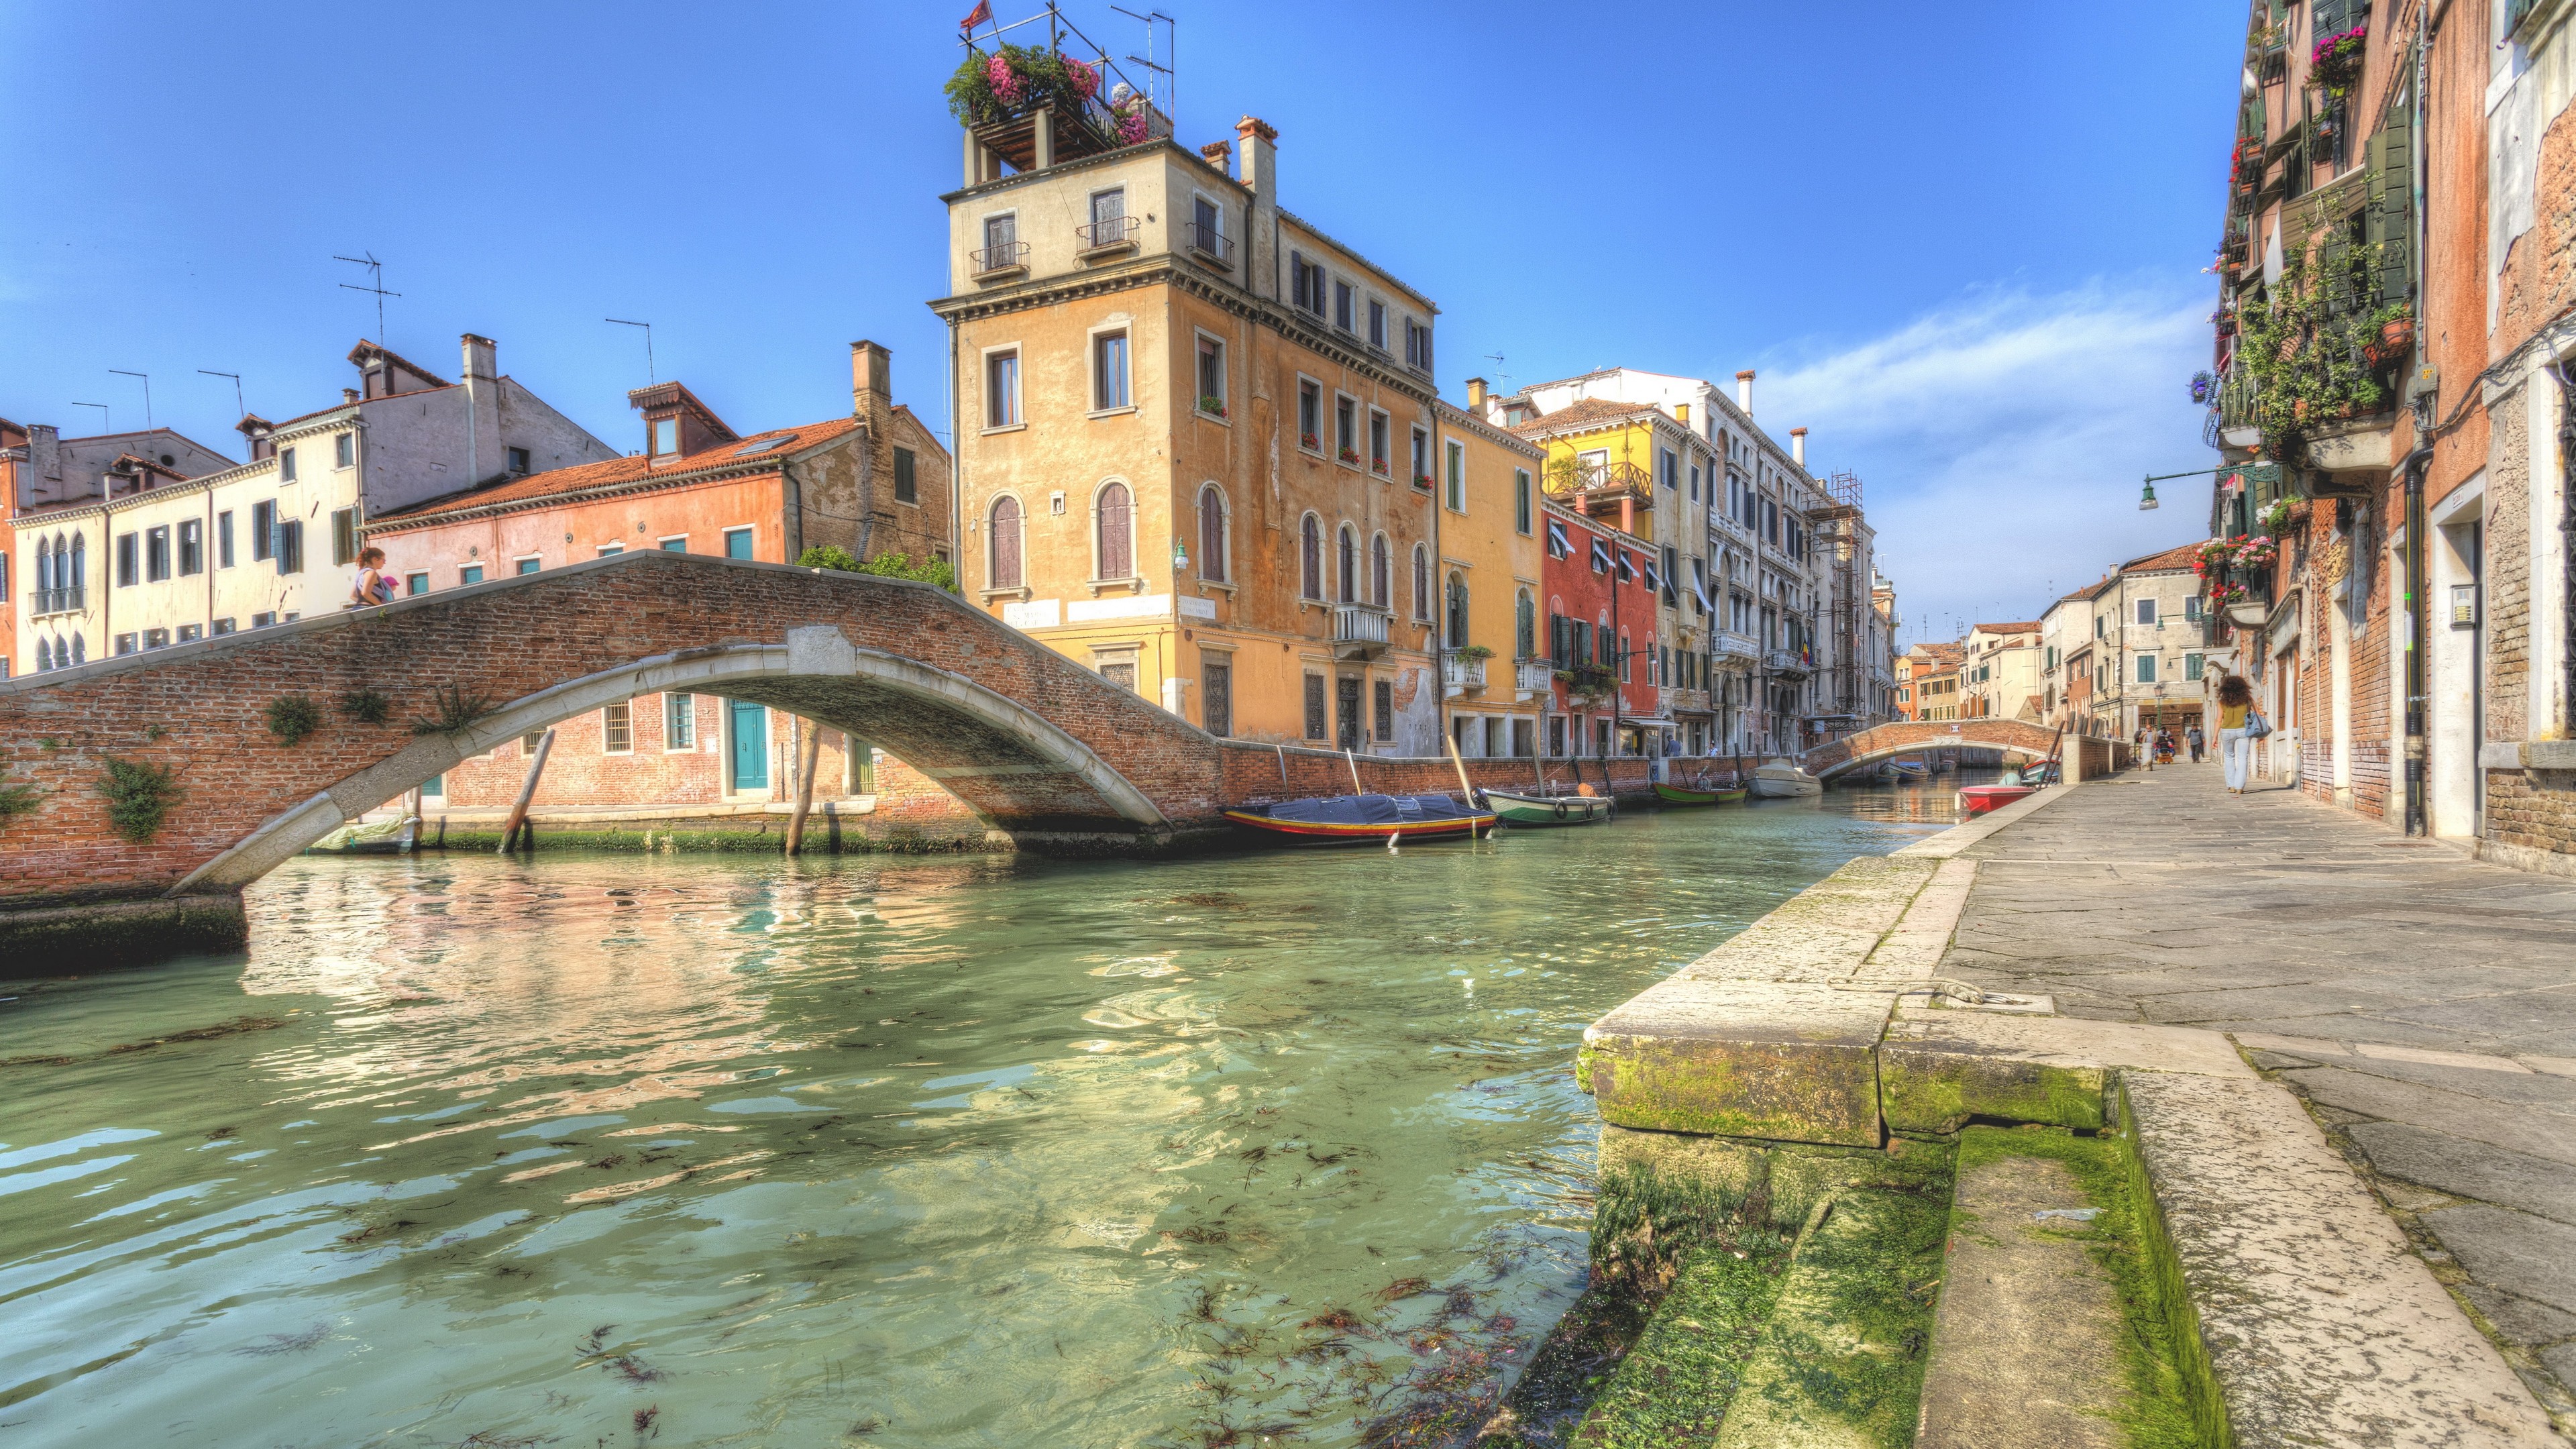 Architecture Building Old Building Water Venice Italy Bridge Street Historic Boat 3840x2160